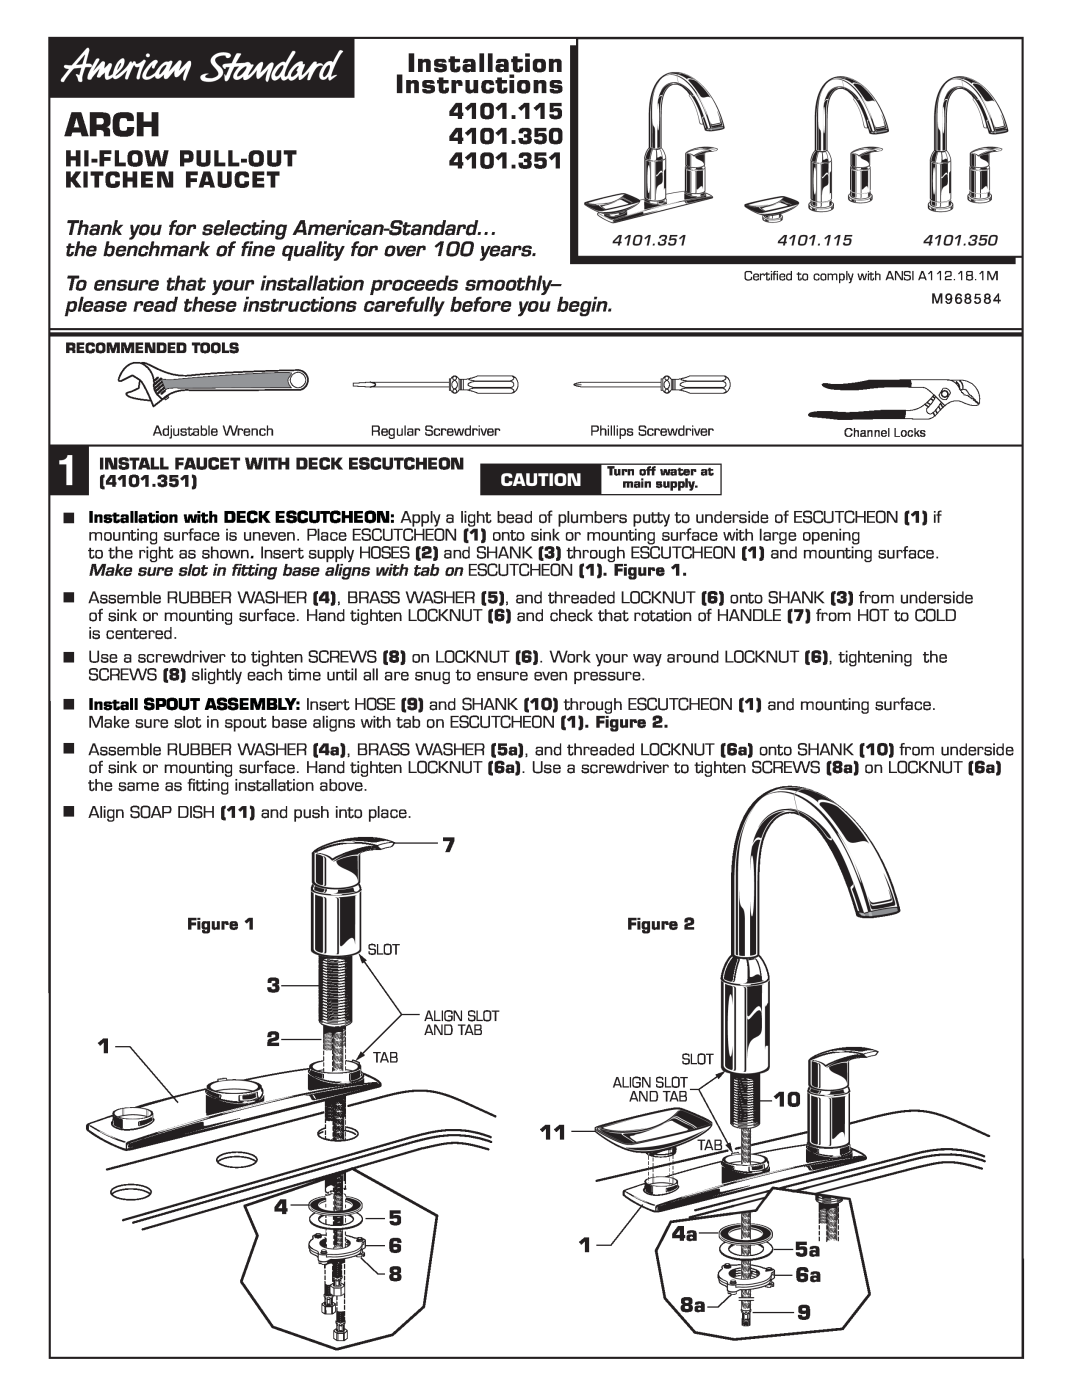 American Standard 4101.115 installation instructions Arch, 4101.350, Hi-Flow Pull-Out, 4101.351, Kitchen Faucet 